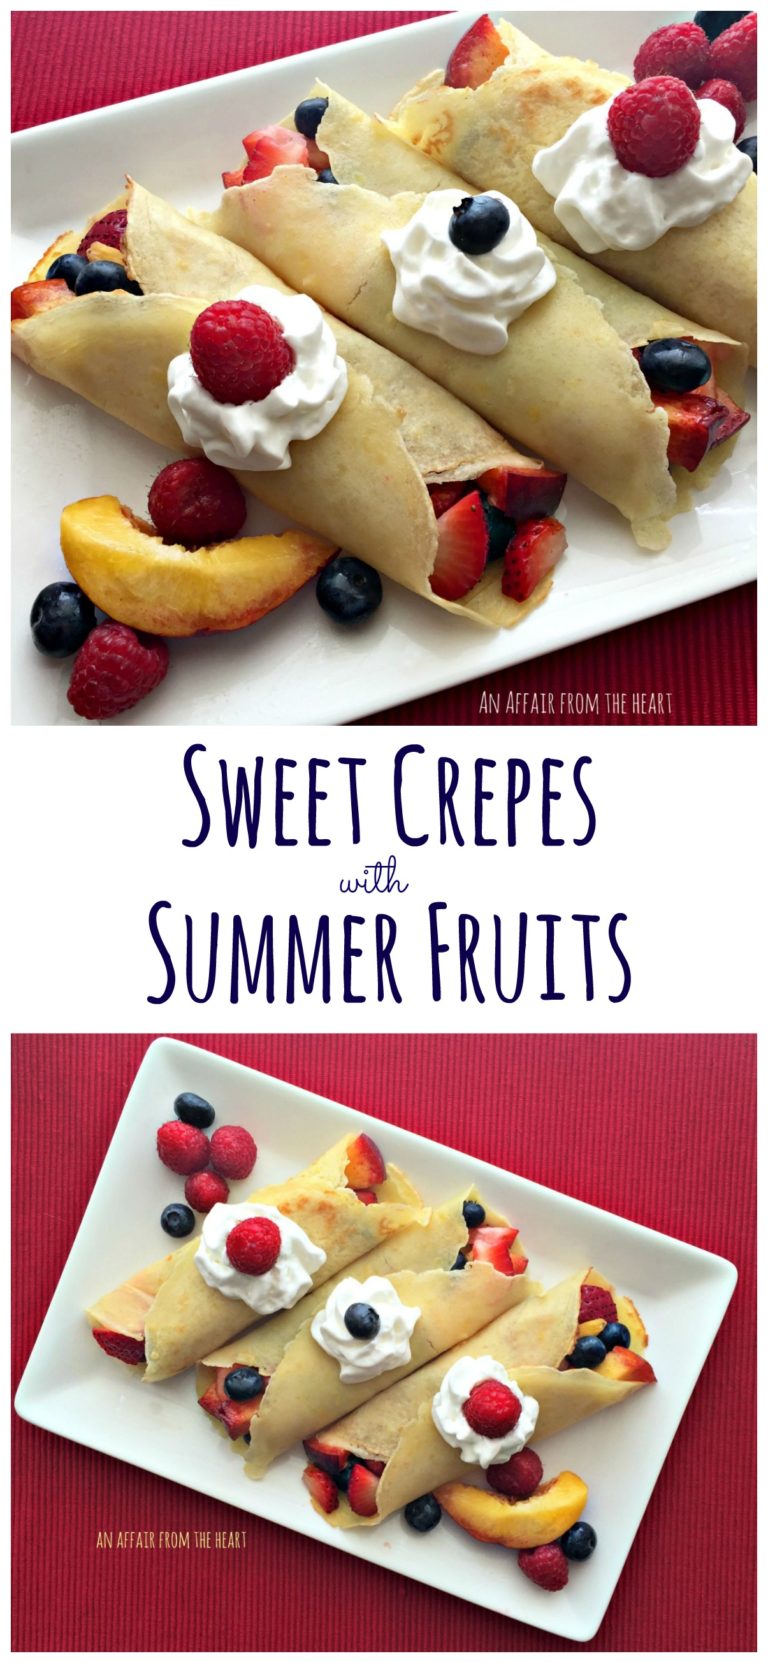 Sweet Crepes with Summer Fruits